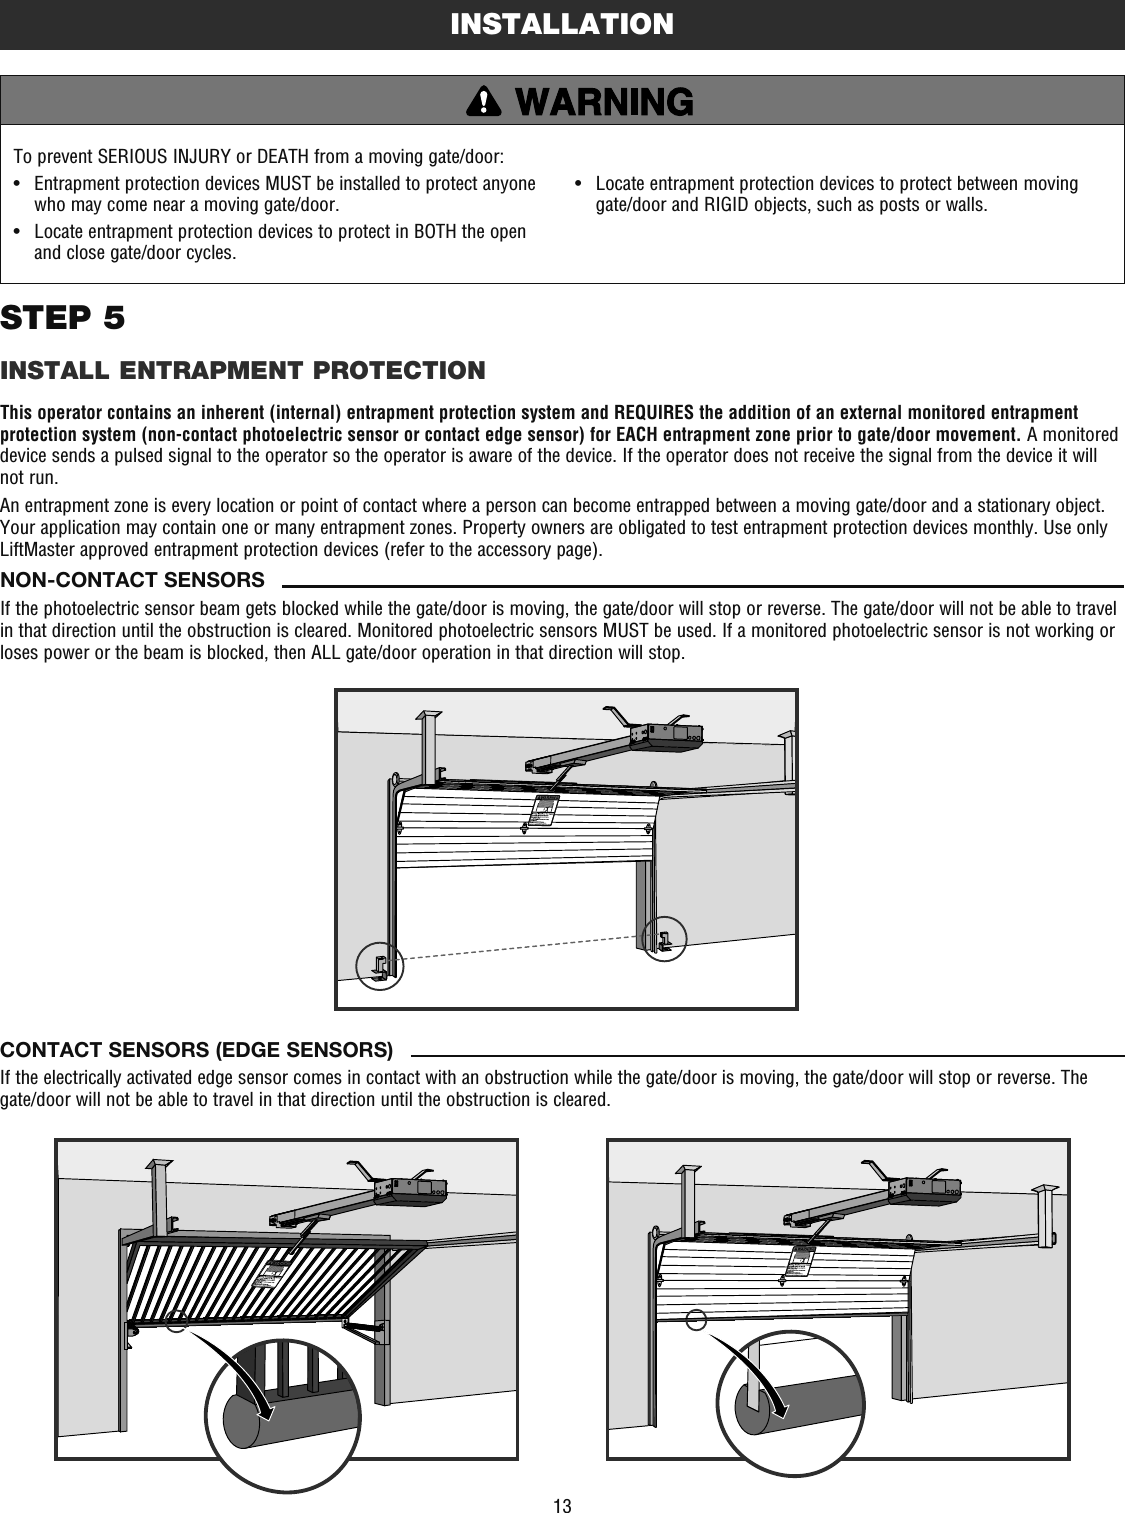 13To prevent SERIOUS INJURY or DEATH from a moving gate/door:•   Entrapment protection devices MUST be installed to protect anyone who may come near a moving gate/door.•   Locate entrapment protection devices to protect in BOTH the open and close gate/door cycles.•   Locate entrapment protection devices to protect between moving gate/door and RIGID objects, such as posts or walls.STEP 5INSTALL ENTRAPMENT PROTECTIONThis operator contains an inherent (internal) entrapment protection system and REQUIRES the addition of an external monitored entrapment protection system (non-contact photoelectric sensor or contact edge sensor) for EACH entrapment zone prior to gate/door movement. A monitored device sends a pulsed signal to the operator so the operator is aware of the device. If the operator does not receive the signal from the device it will not run.An entrapment zone is every location or point of contact where a person can become entrapped between a moving gate/door and a stationary object. Your application may contain one or many entrapment zones. Property owners are obligated to test entrapment protection devices monthly. Use only LiftMaster approved entrapment protection devices (refer to the accessory page).INSTALLATIONCONTACT SENSORS (EDGE SENSORS)If the electrically activated edge sensor comes in contact with an obstruction while the gate/door is moving, the gate/door will stop or reverse. The gate/door will not be able to travel in that direction until the obstruction is cleared.NON-CONTACT SENSORSIf the photoelectric sensor beam gets blocked while the gate/door is moving, the gate/door will stop or reverse. The gate/door will not be able to travel in that direction until the obstruction is cleared. Monitored photoelectric sensors MUST be used. If a monitored photoelectric sensor is not working or loses power or the beam is blocked, then ALL gate/door operation in that direction will stop. 